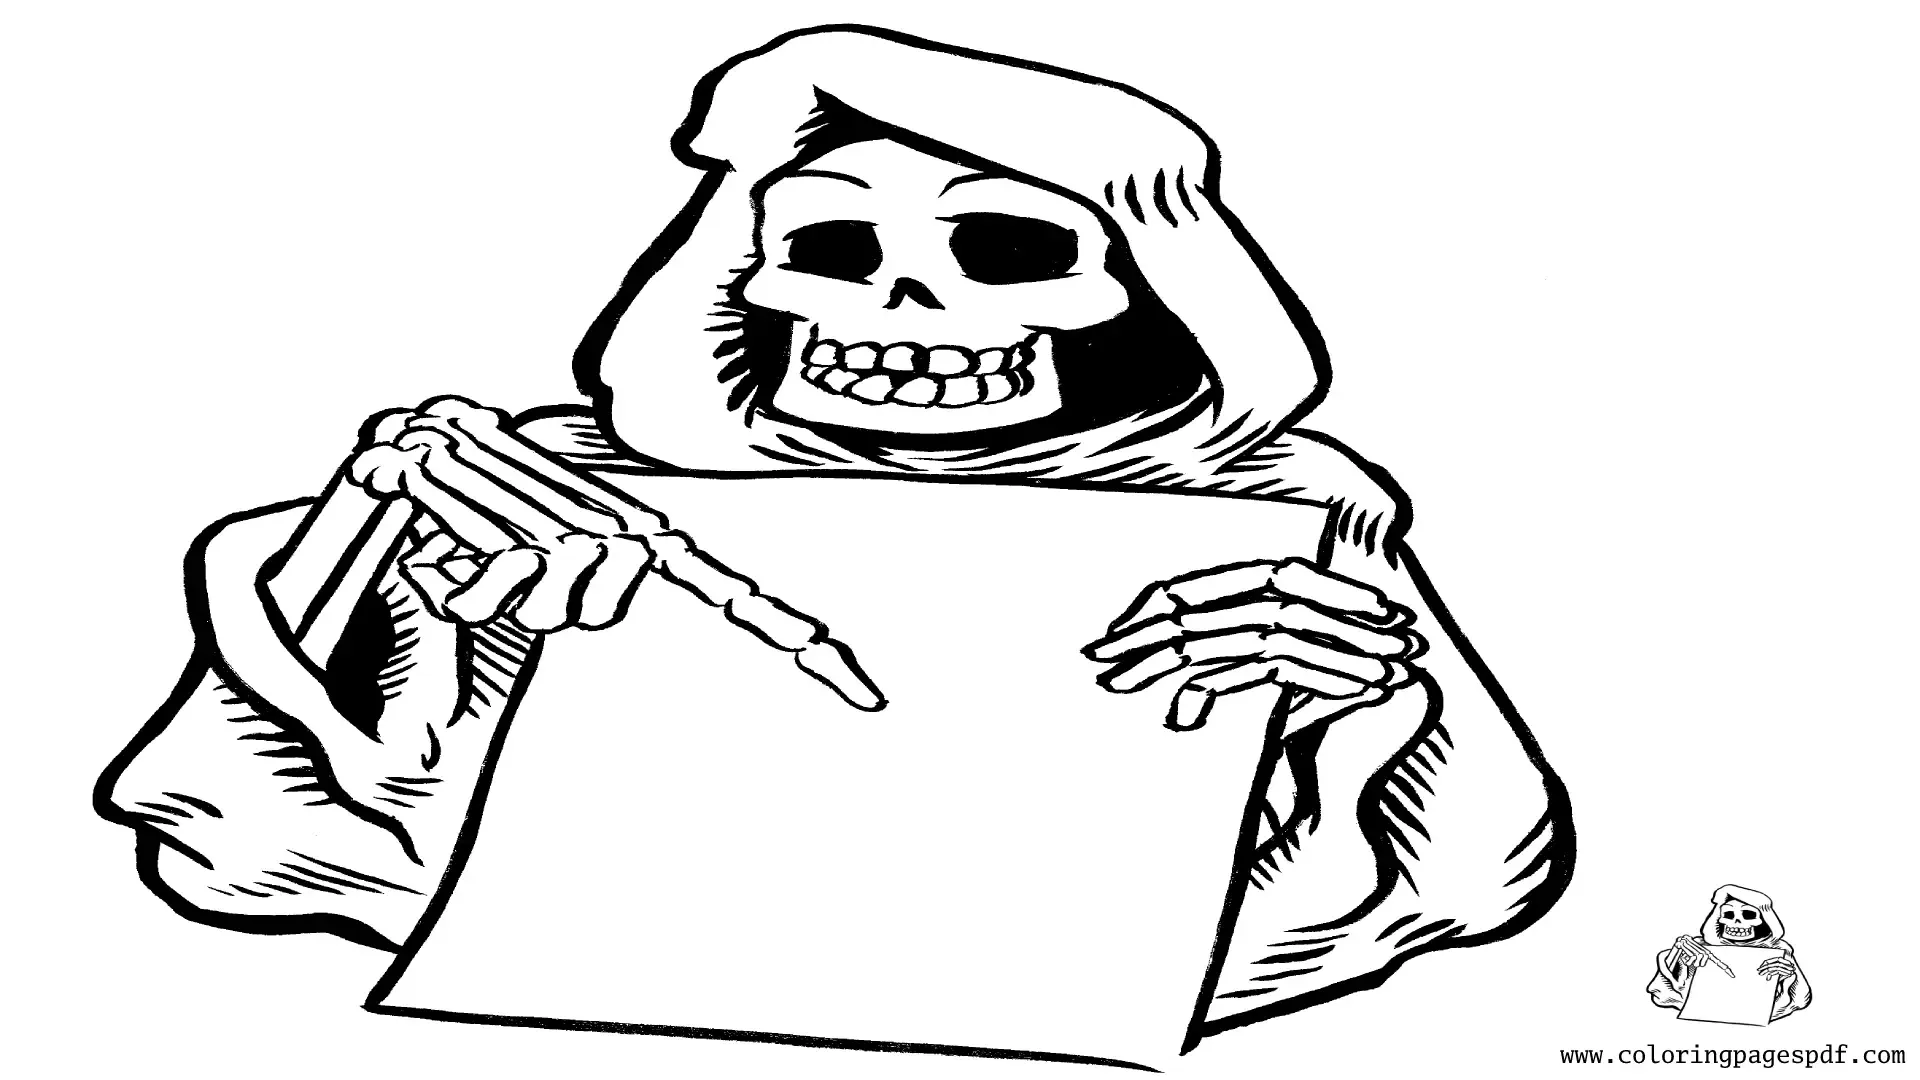 Coloring Page Of Grim Reaper Pointing To A Paper